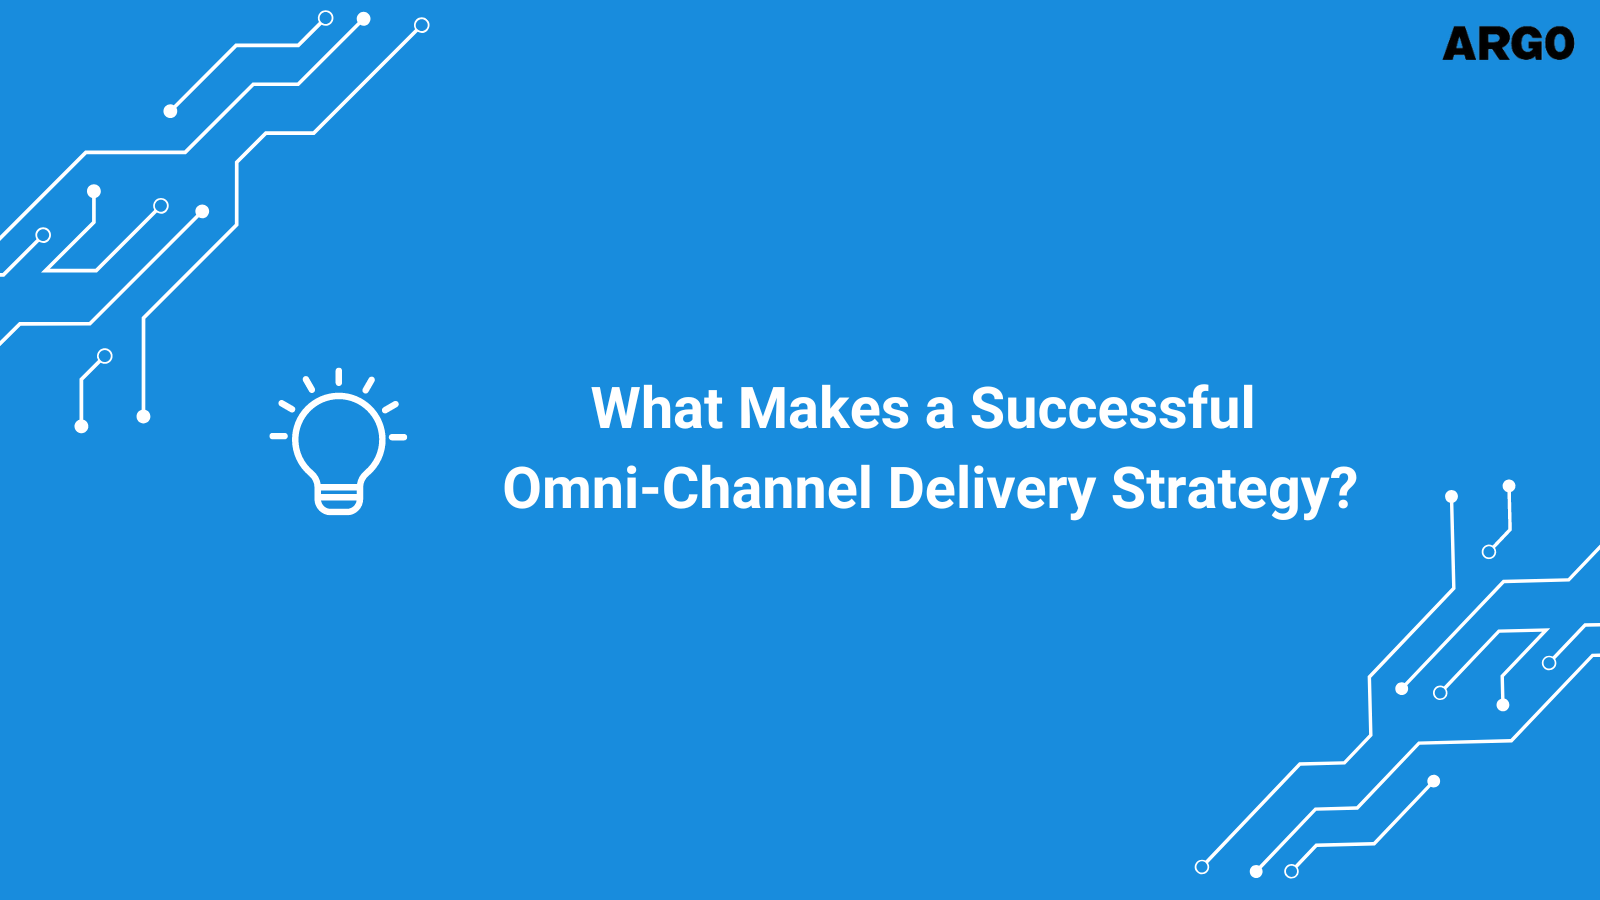 What Makes a Successful Omni-Channel Delivery Strategy?